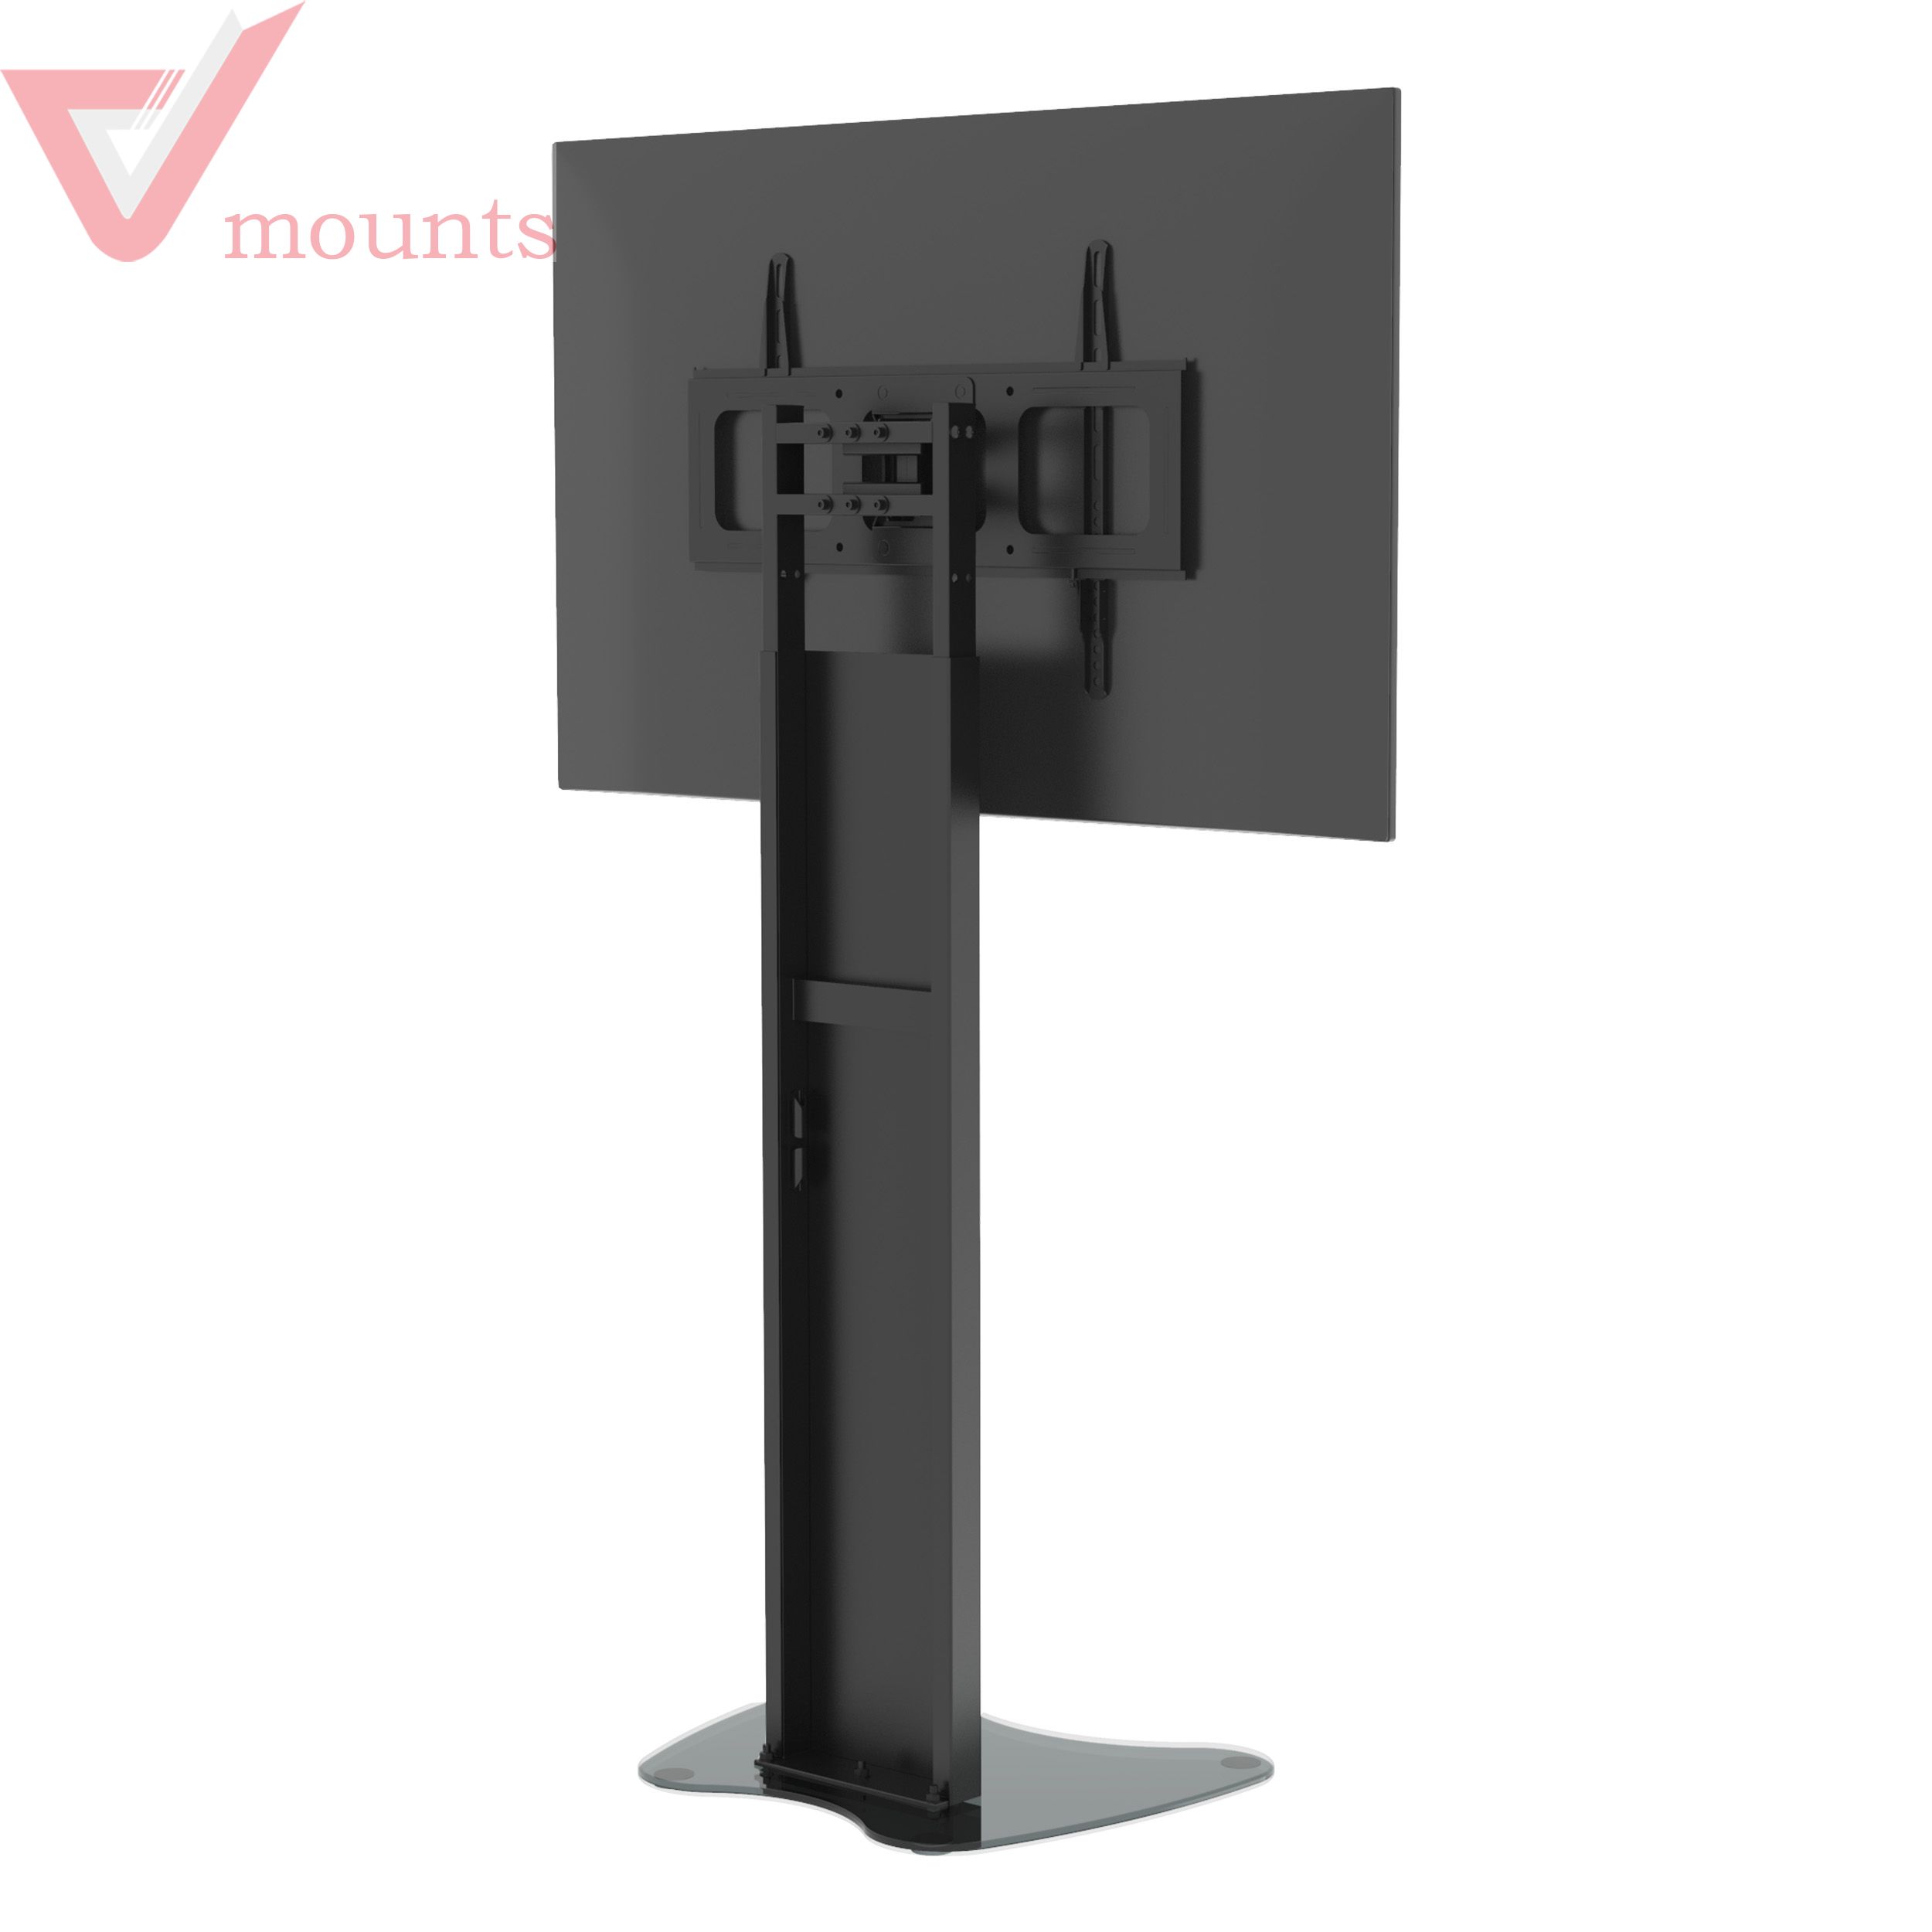 Tiltable and Rotatable TV Stand or Cart VM-ST91